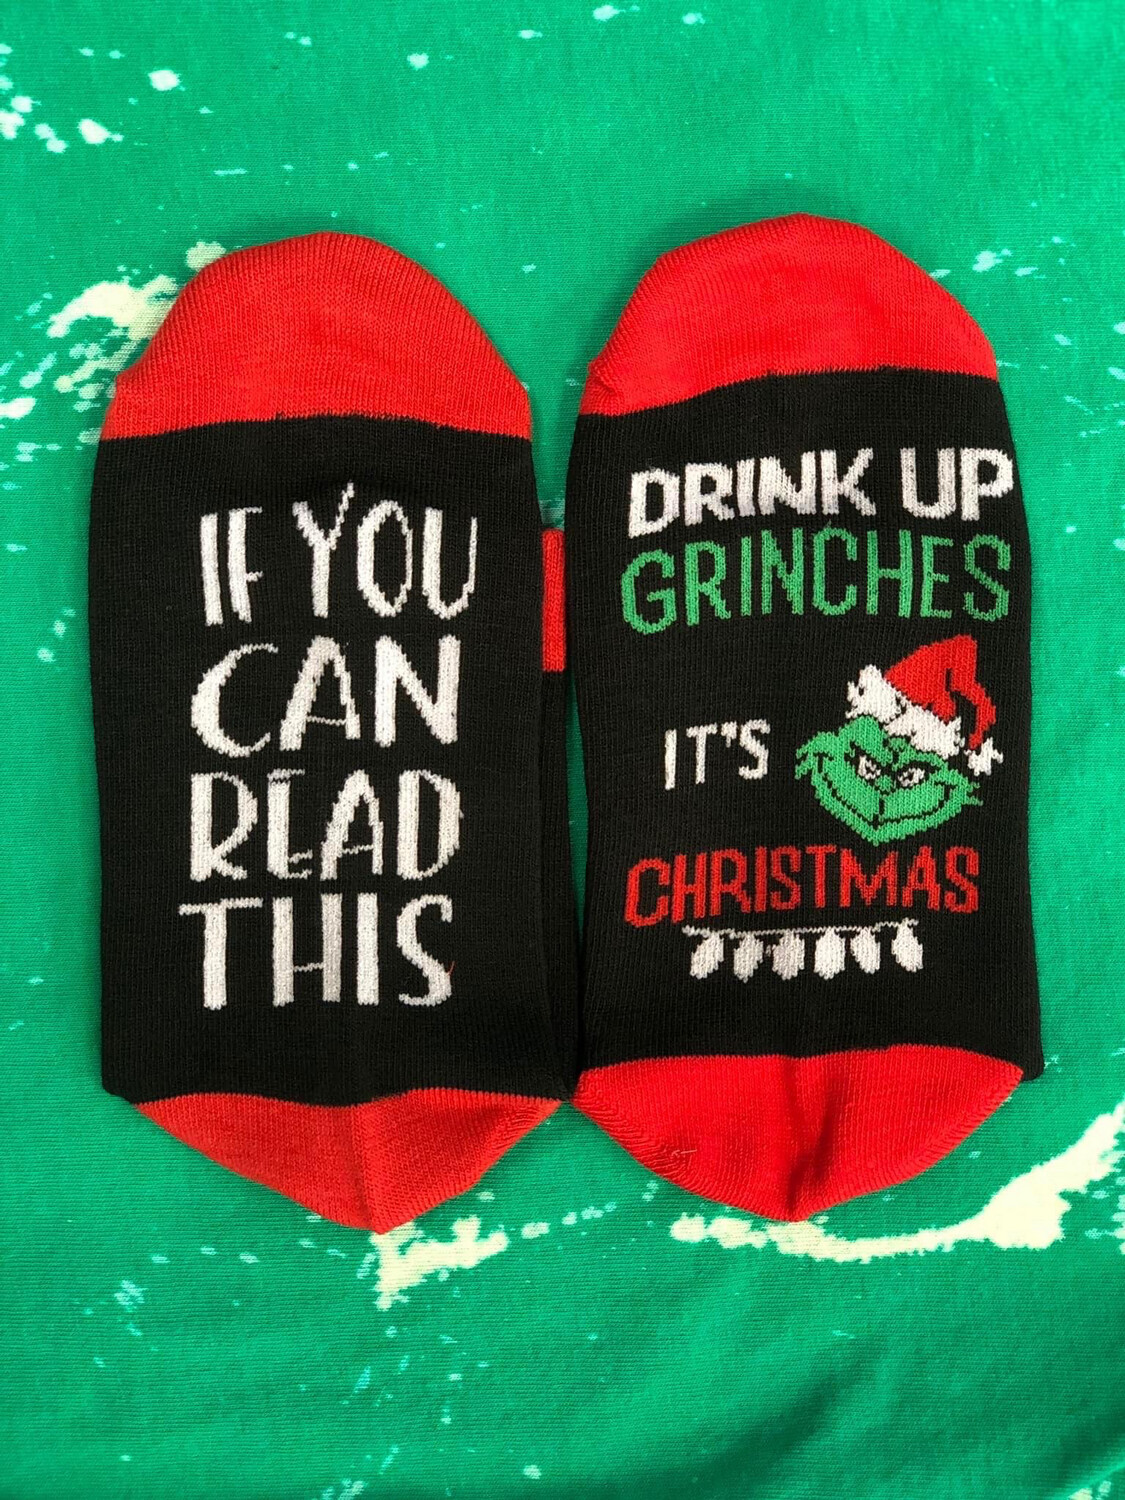 Drink Up Grinches Socks!